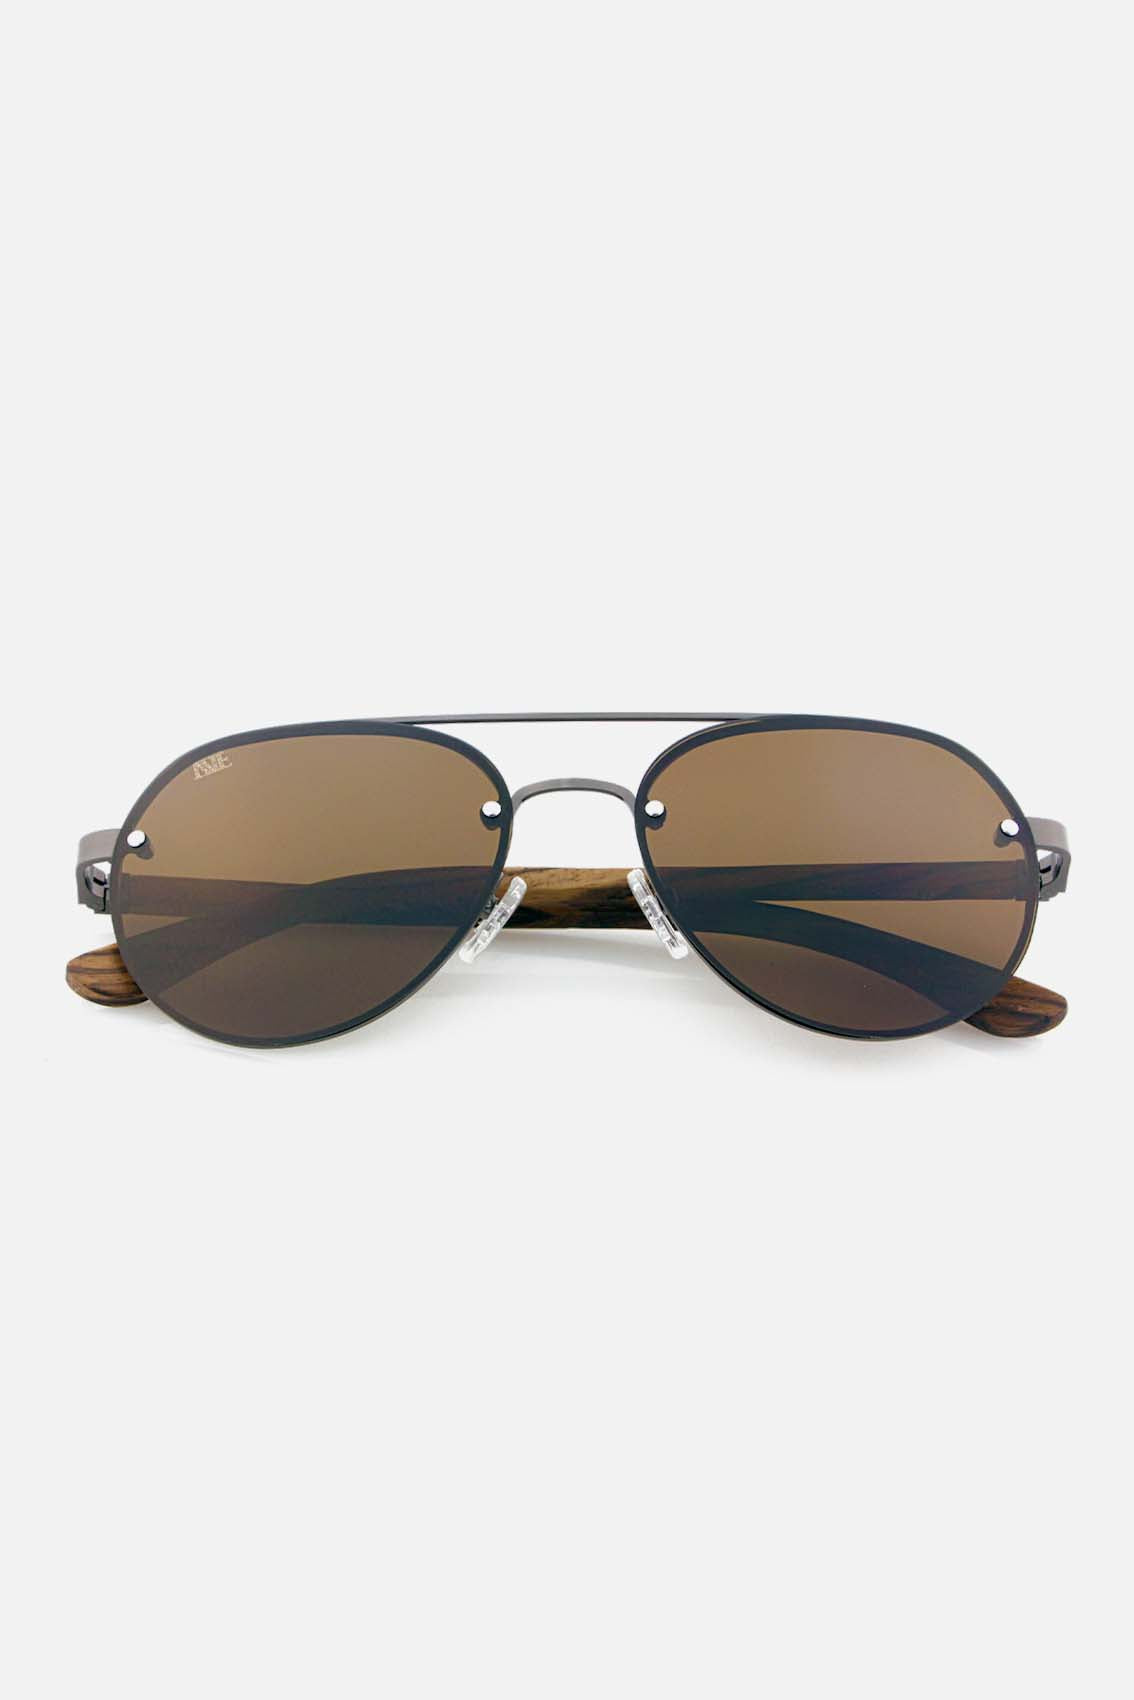 Men's aviator sunglasses metal black with wooden hangers and mirrored glass